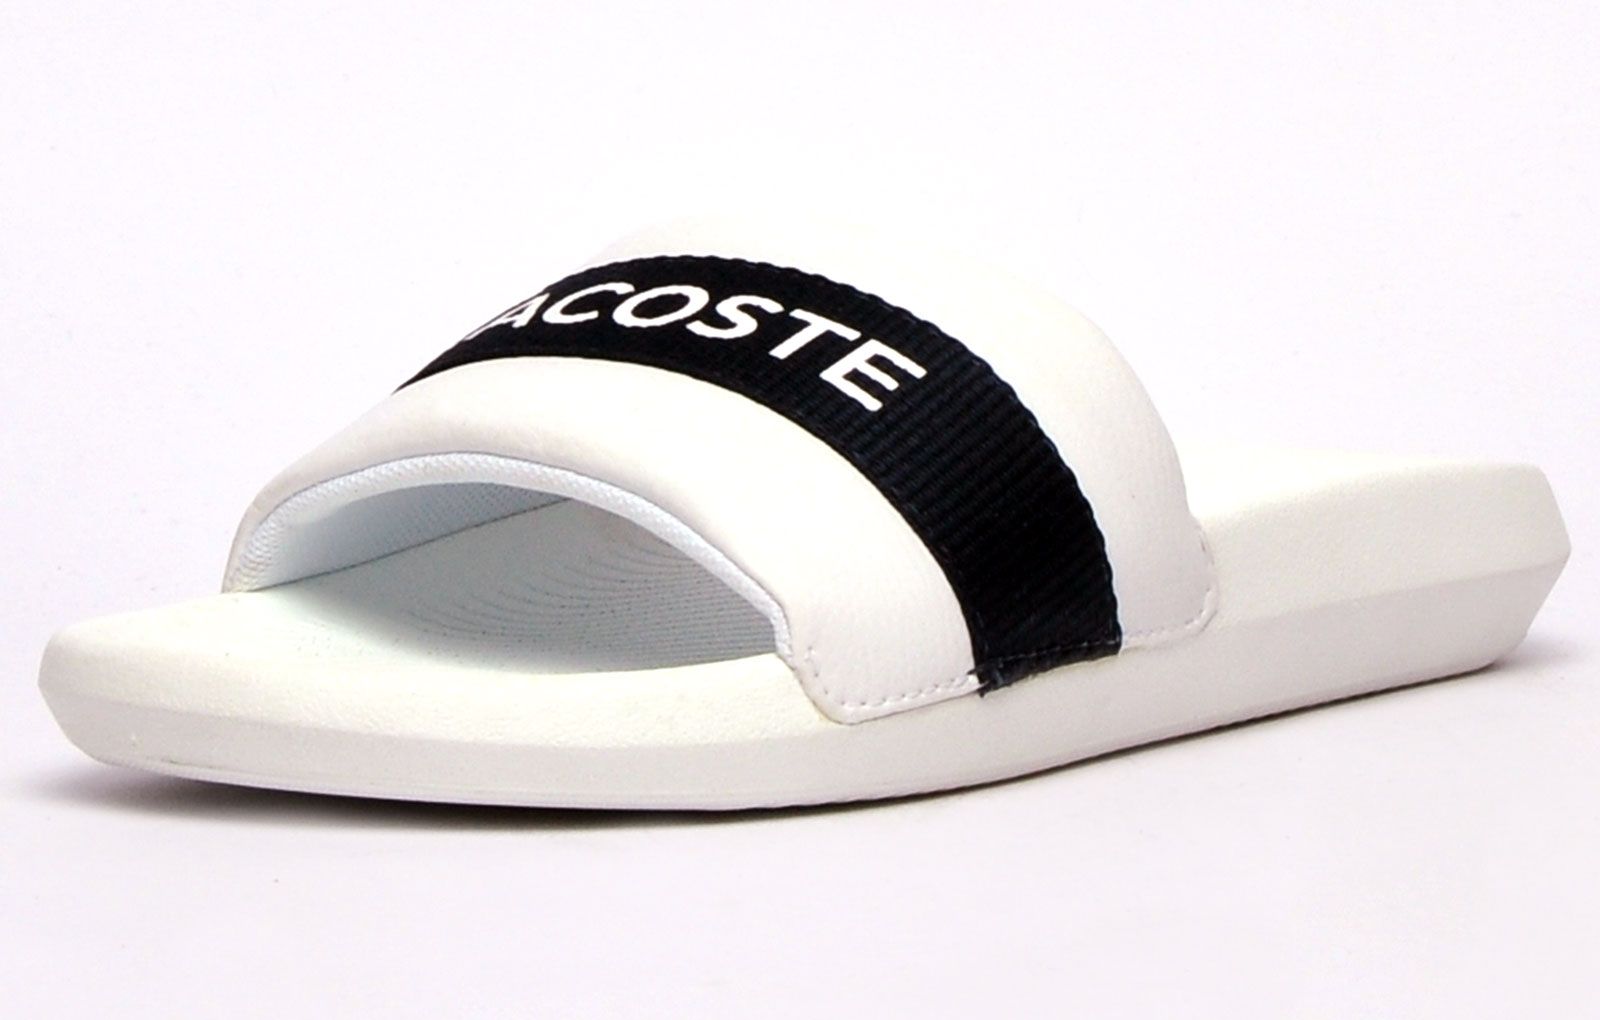 Step into on trend summer style with these mensCroco Slides from Lacoste. In a classic colourway, these designer sandals are delivered in a smooth synthetic upper with band stripe detailing across the forefoot foot strap. The super comfy moulded footbed delivers the perfect fit and feel while the grippy outsole will keep you sure and safe around the pool or in the shower. These designer slides are finished with eye catching Lacoste branding throughout just in case you want a sign of approval that youre wearing cool on trend style this summer season 
 
 - Synthetic comfort upper
 - Comfort moulded footbed
 - Single strap construction
 - Grippy outsole
 - Slip on wear
 - Iconic Lacoste branding throughout
 Please Note: These slides are supplied poly bagged (without box)
 These Lacoste Slides are sold as B grades which means there may be some very slight cosmetic issues on the shoe and they come in a poly bag. There could be occasional issues with wrong swing tags being allocated to wrong shoes by Lacoste themselves which could result in some size confusion but you must take the size IN THE SHOE as the size that the shoe actually is ( not what is on the tag ). We have checked most of the shoes and in our opinion,all are practically perfect without any blemishes on them at all and in essence if the shoes did not have the letter B denoted on the swing tag you would presume these were perfect shoes. All shoes are guaranteed against fair wear and tear and offer a substantial saving against the normal high street price. The overall function or performance of the shoe will not be affected by any minor cosmetic issues. B Grades are original authentic products released by the brand manufacturer with their approval at greatly reduced prices. If you are unhappy with your purchase, we will be more than happy to take the shoes back from you and issue a full refund